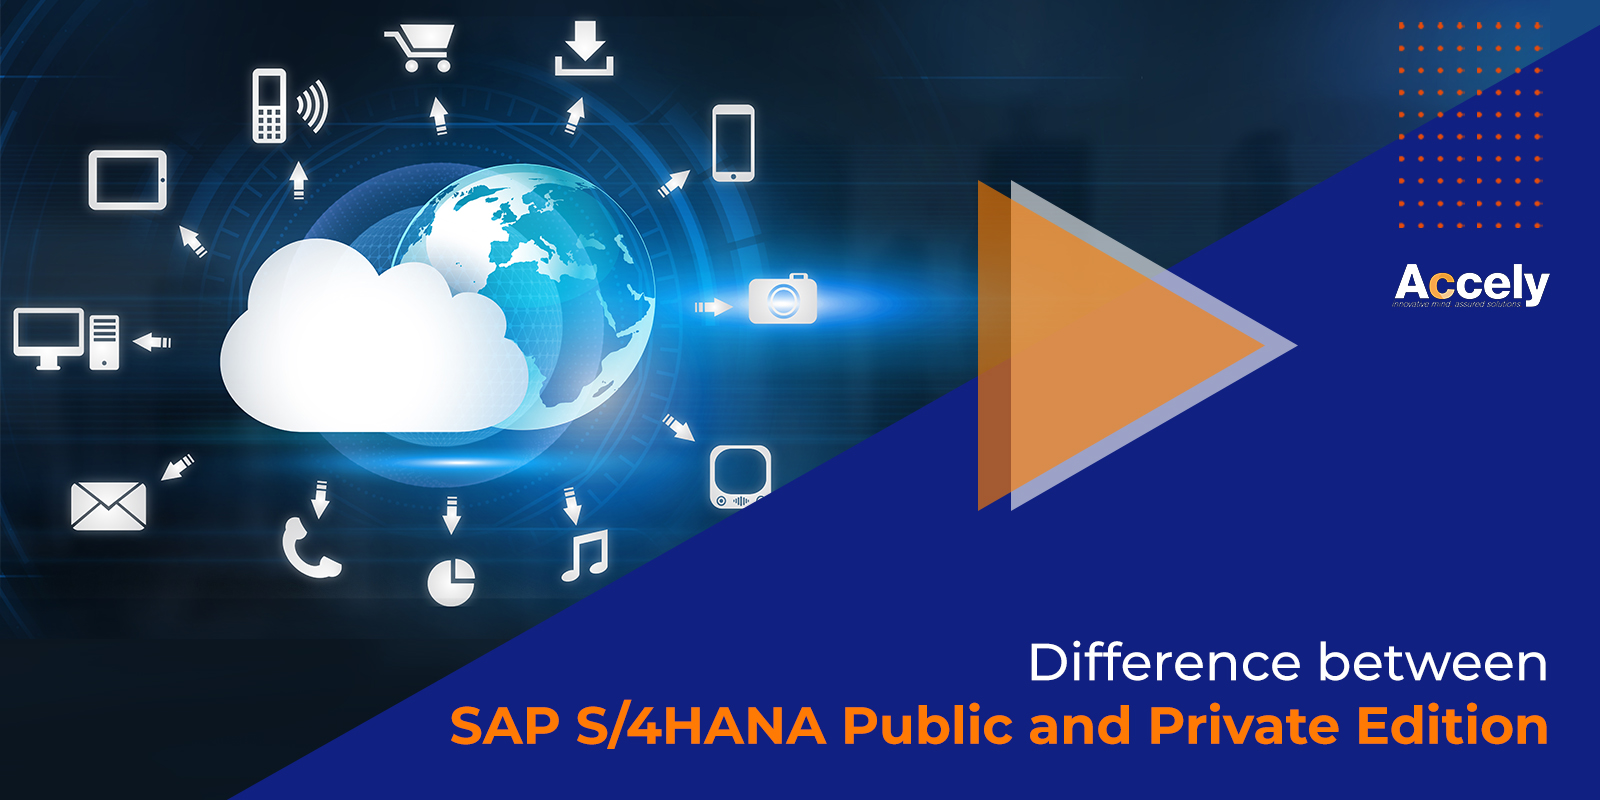 Difference between SAP S/4HANA Public and Private Edition